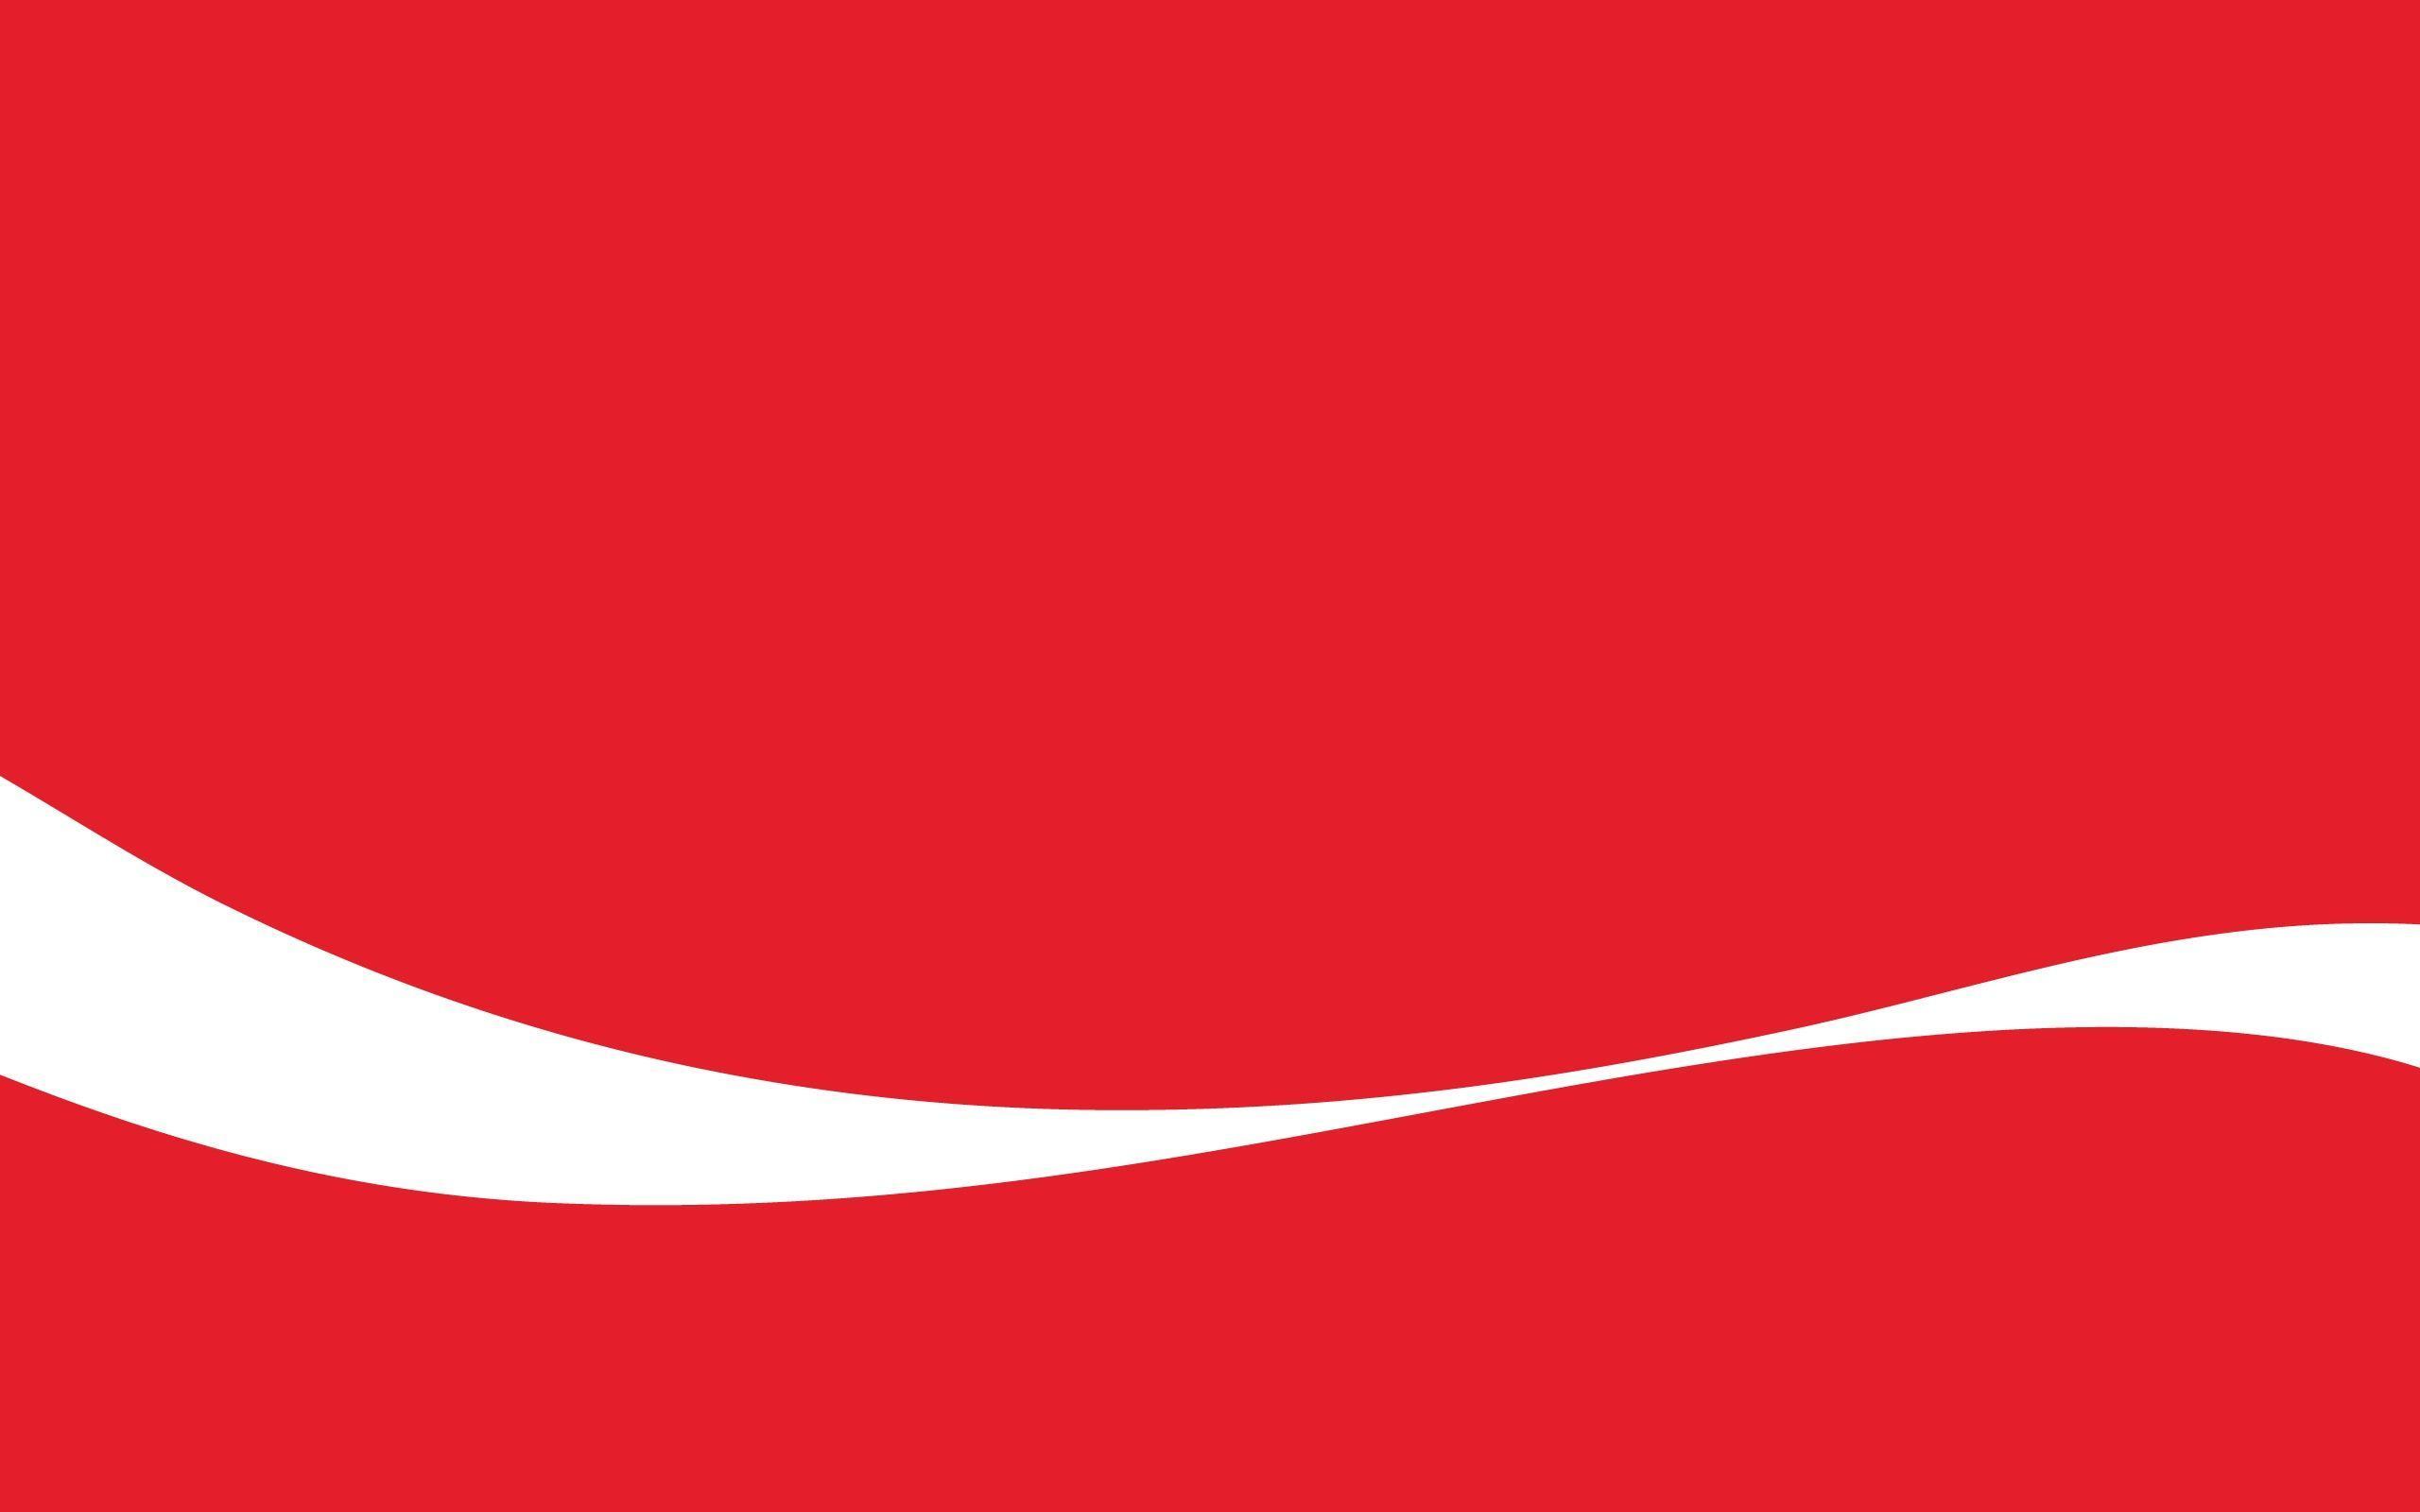 Coca Cola Background Free Download. HD Wallpaper, Background